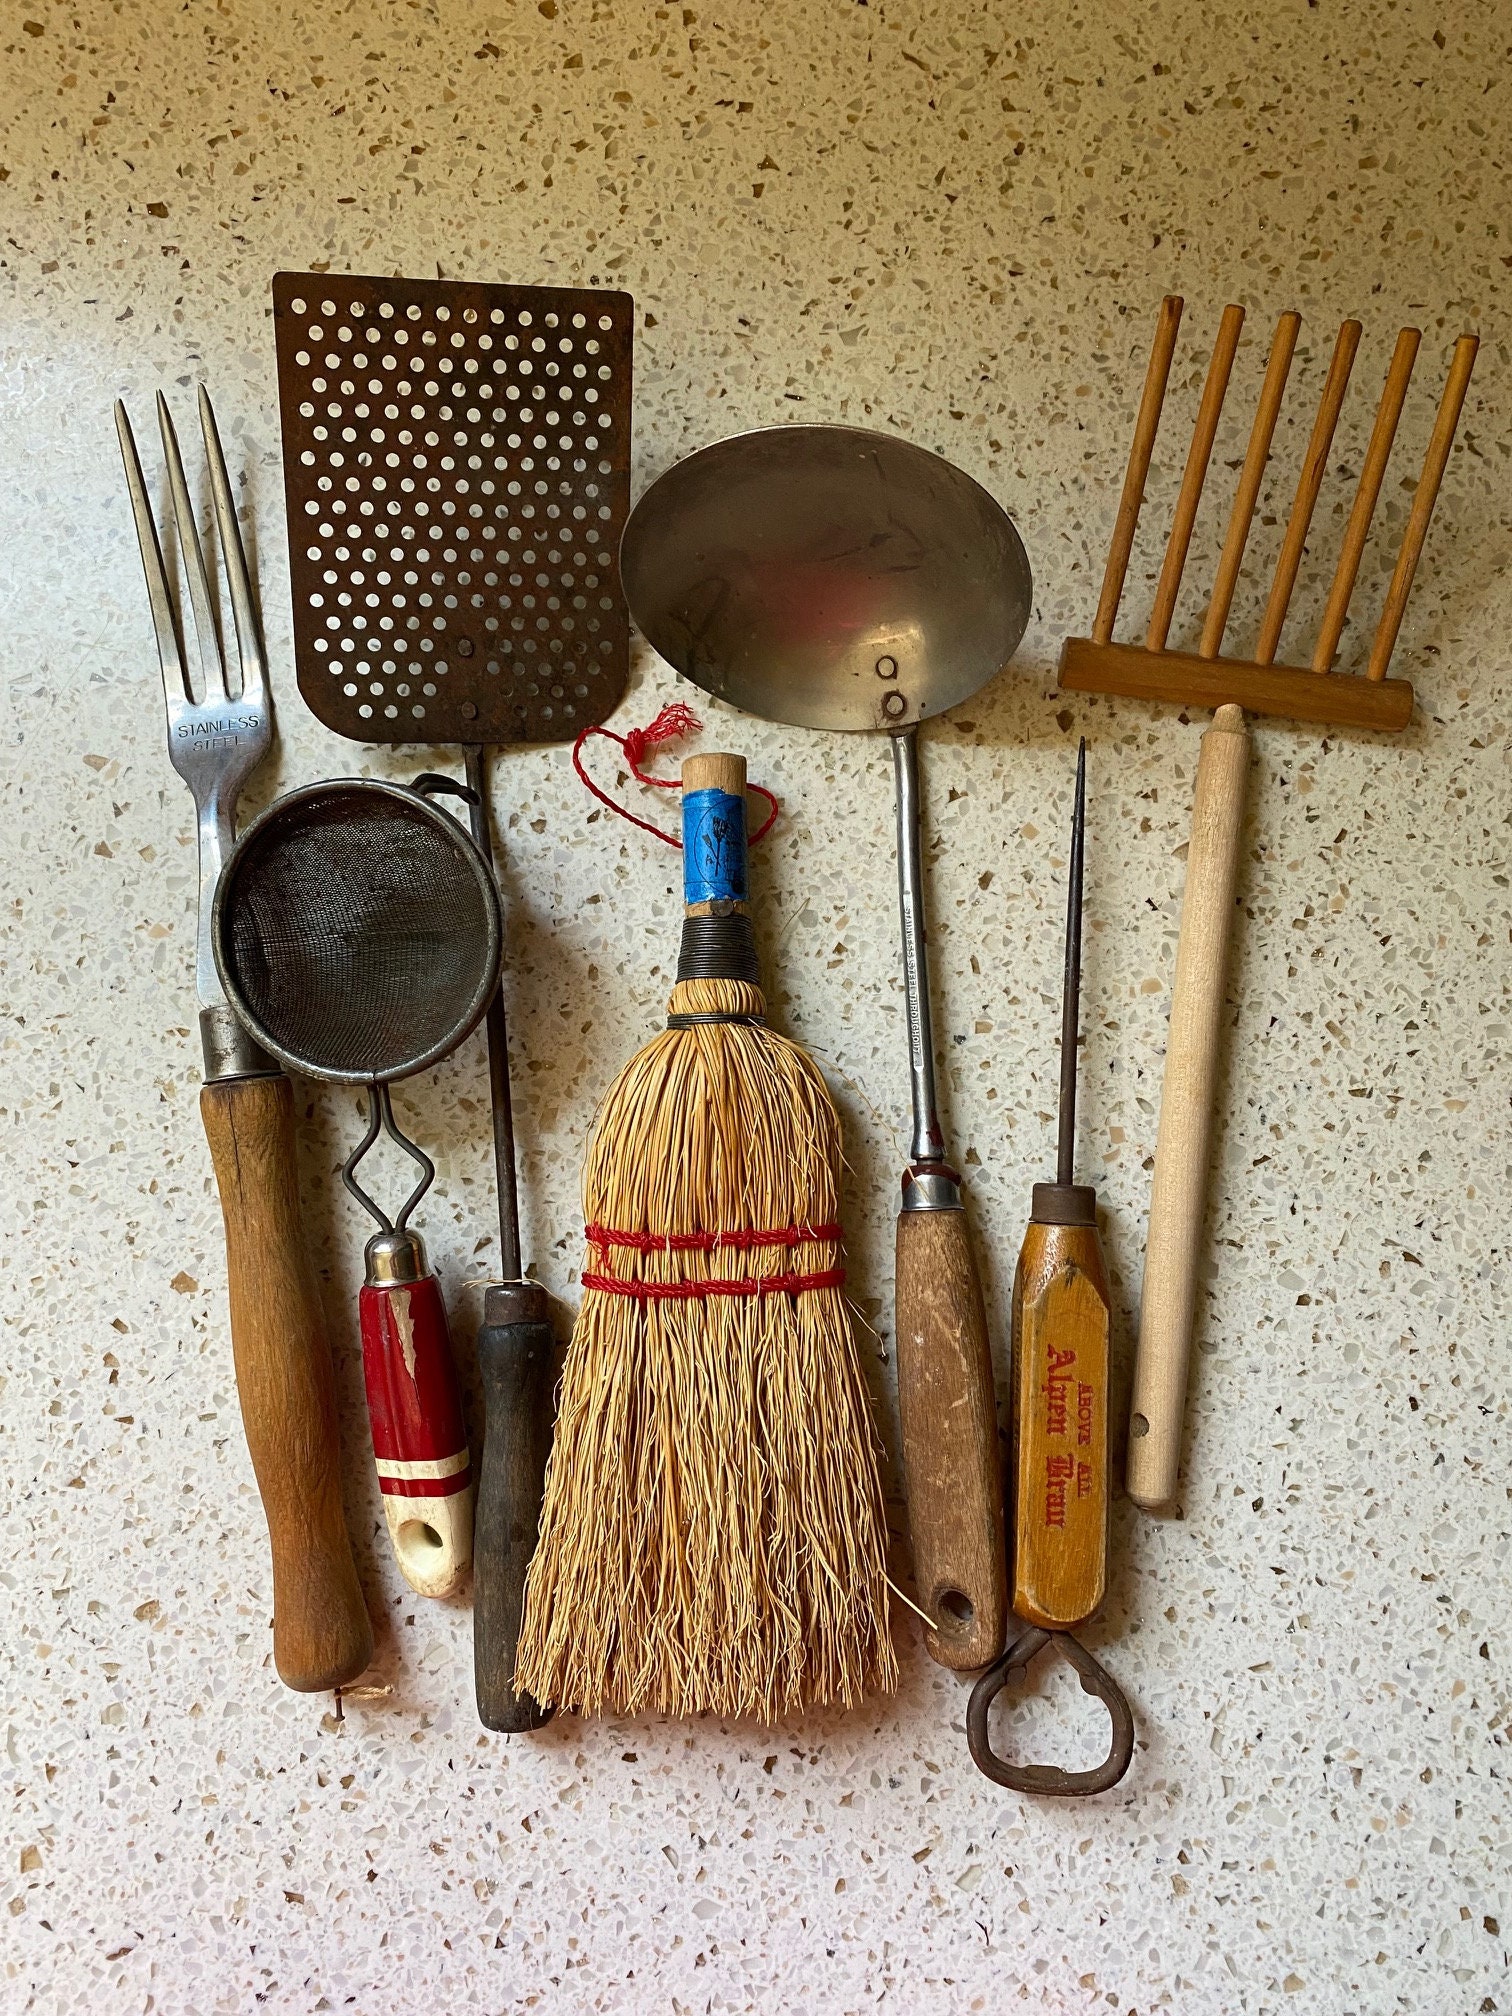 Old, retro, or simply weird kitchen gadgets